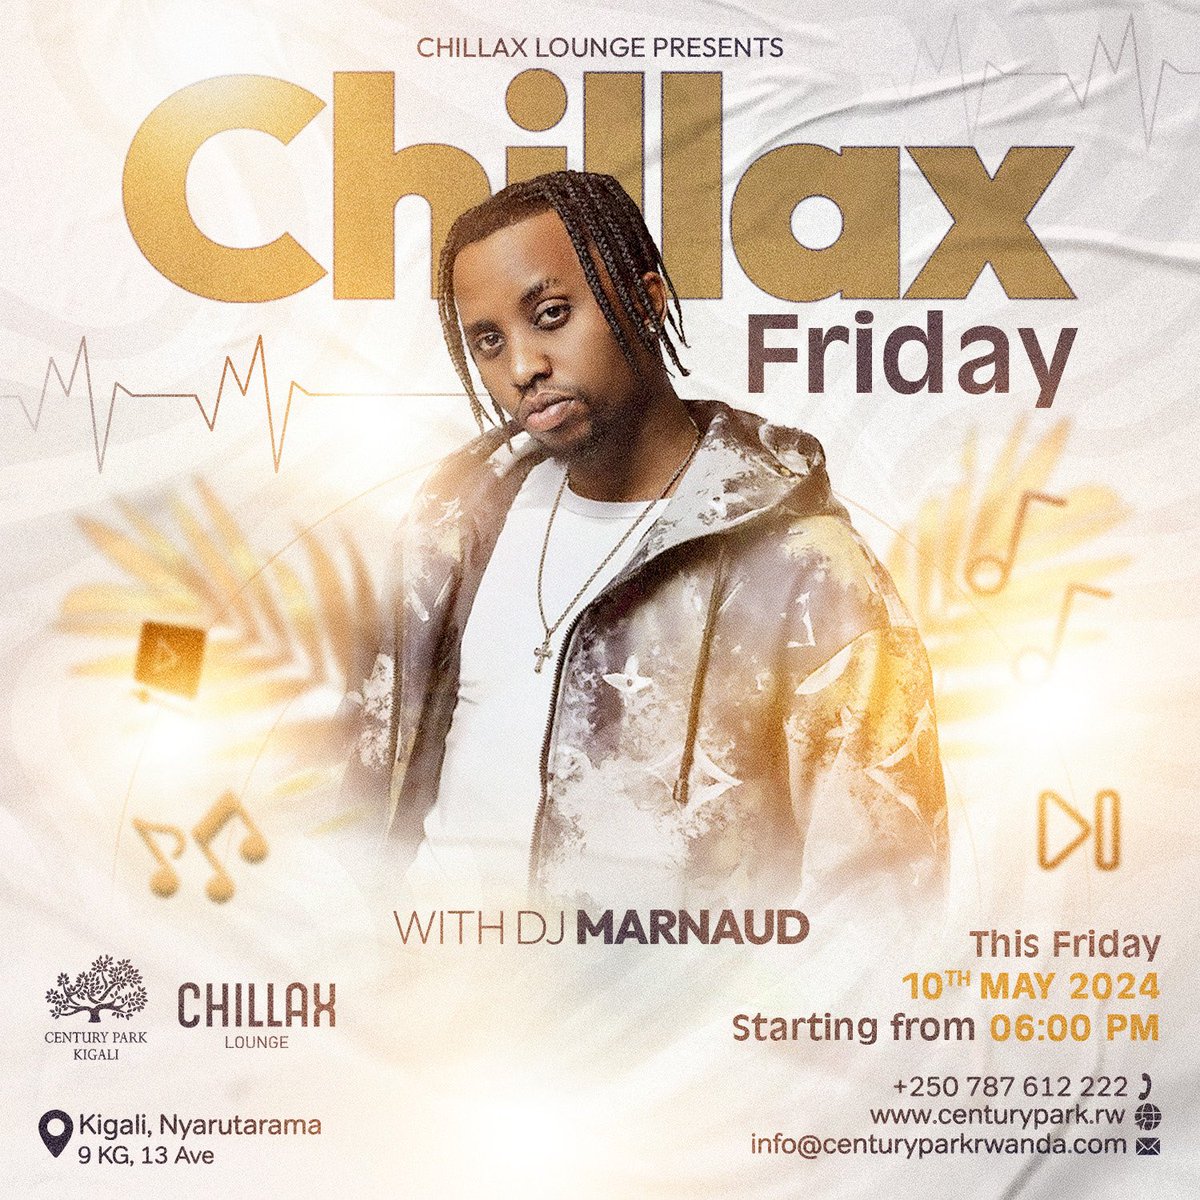 🔥 Get ready to turn up the heat🔥 Guess what? @DjMarnaud is hitting up Chillax Lounge tomorrow night🎶🚀 It's gonna be one epic Friday jam-packed with vibes you won't wanna miss. Round up your crew and let's make some memories! See ya there! 💃🕺 #DJMarnaud #ChillaxLounge